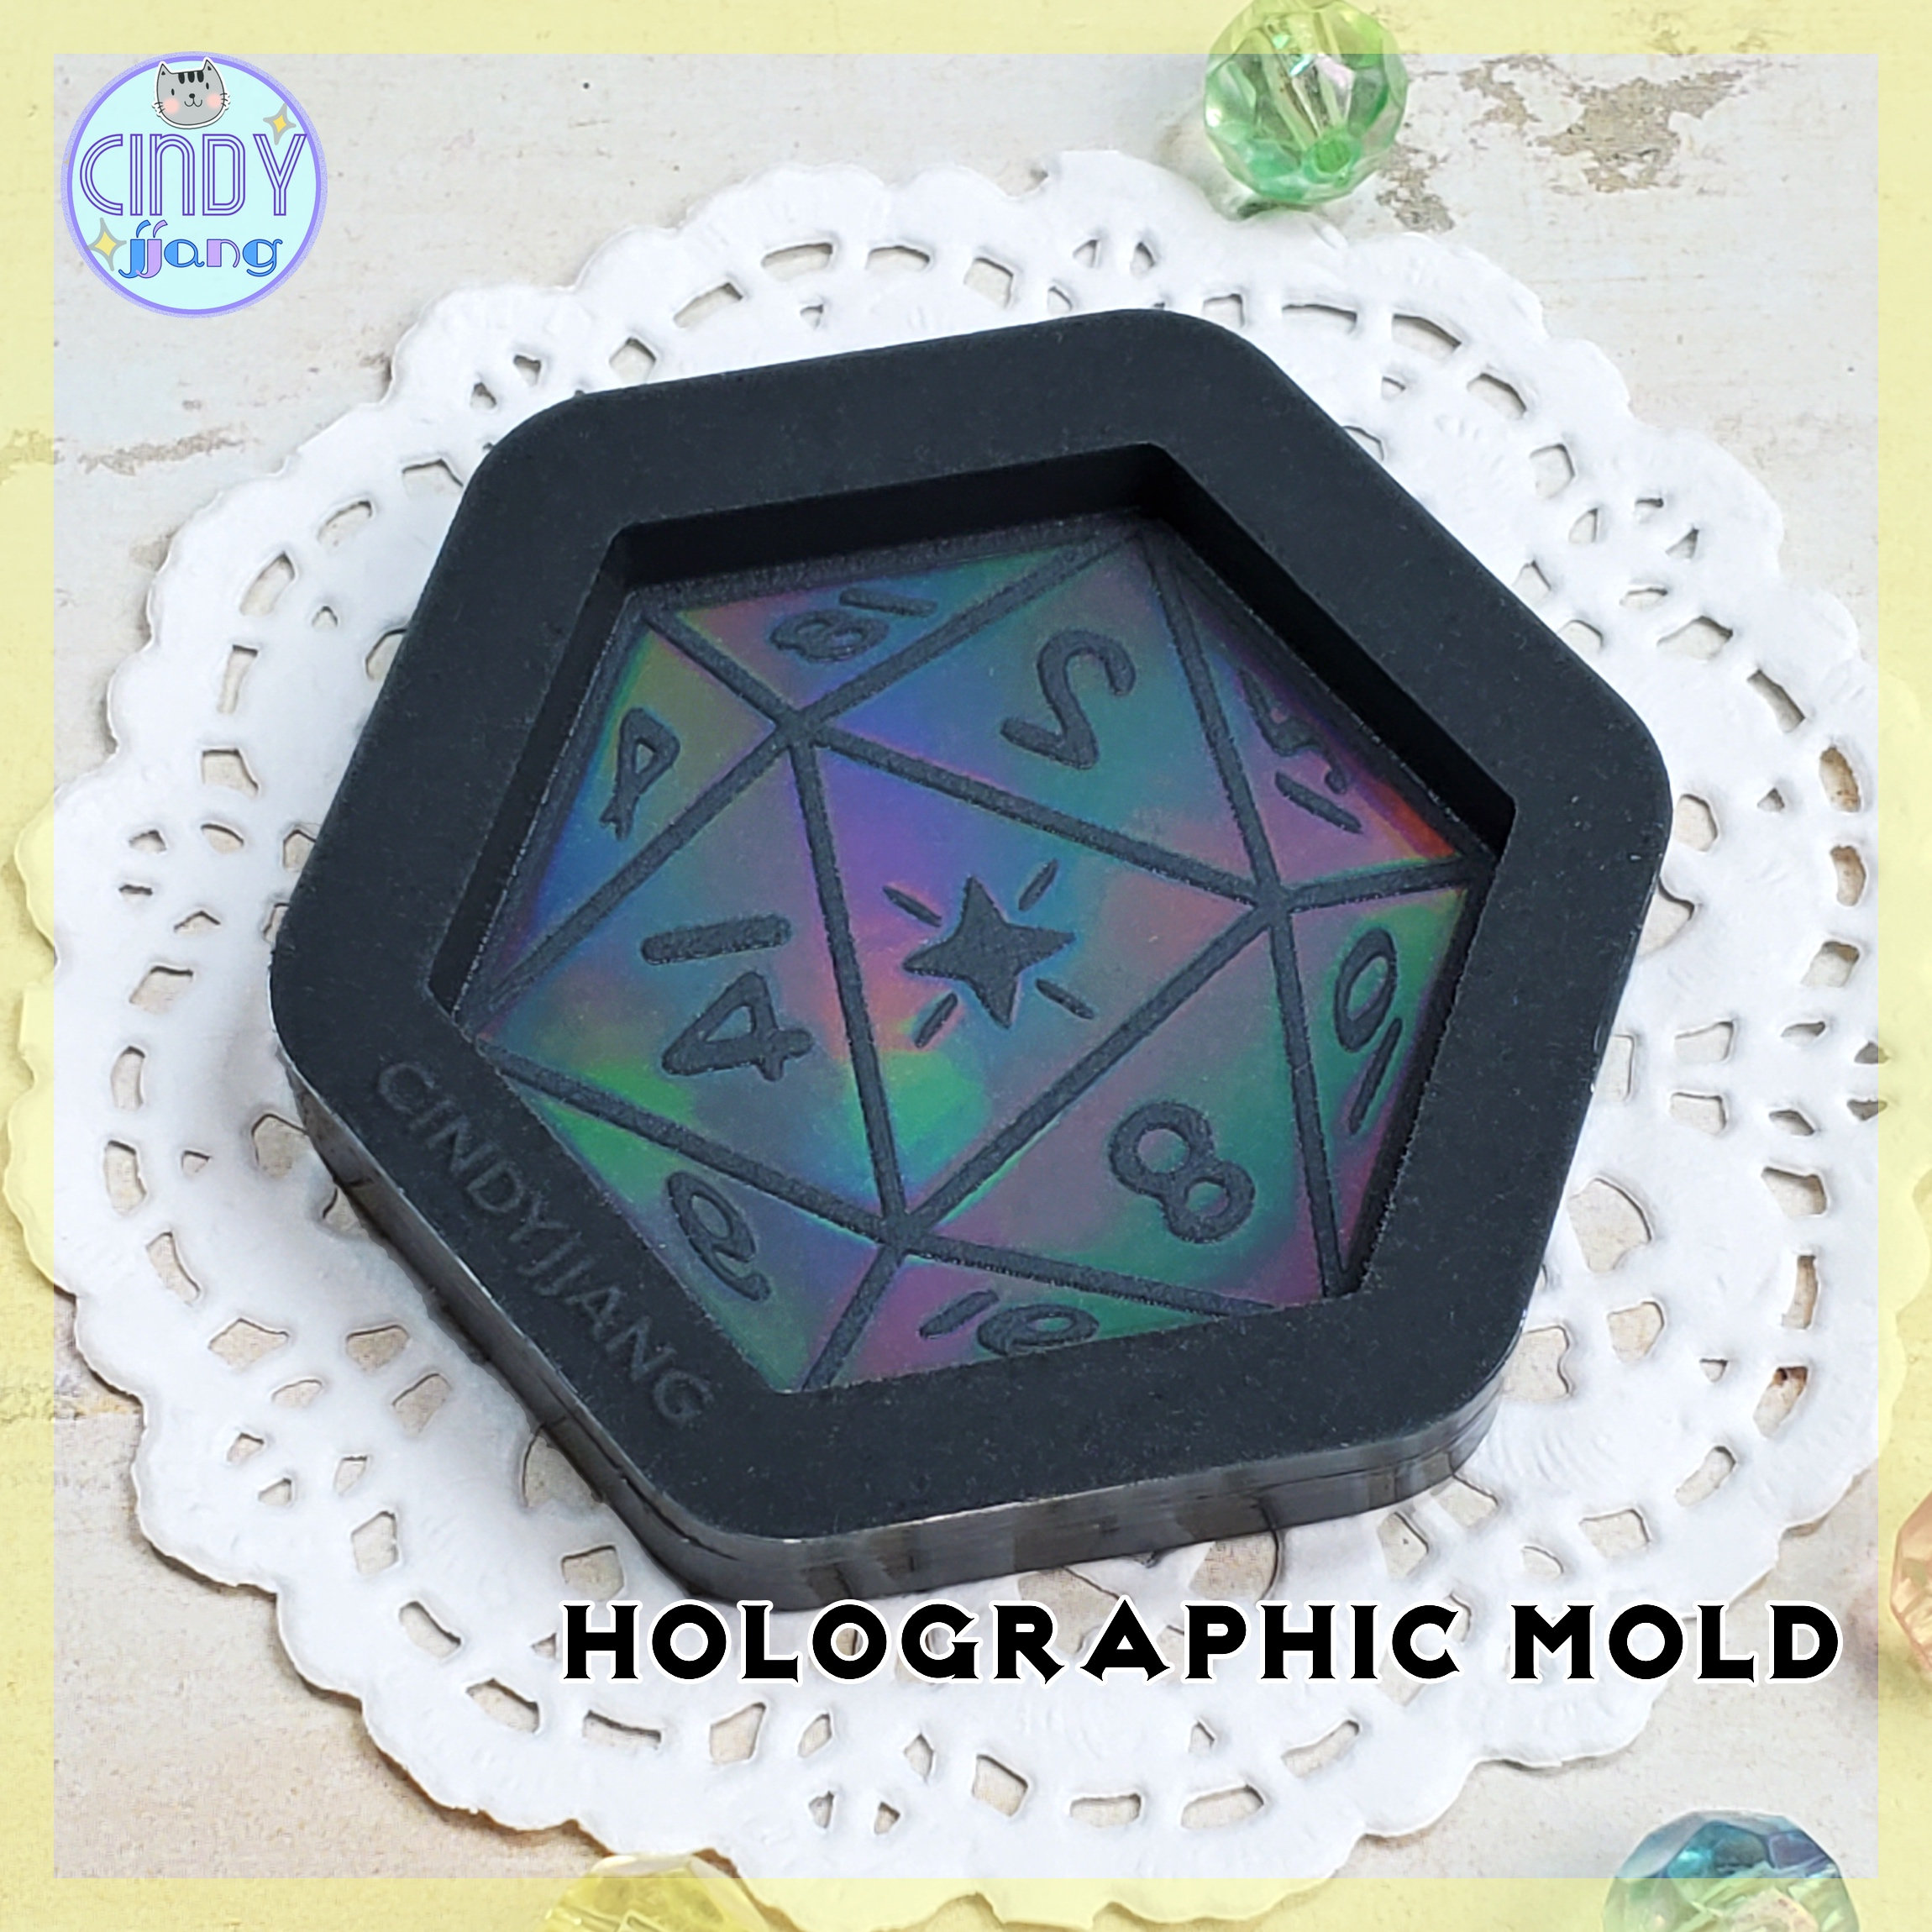 Holographic Turtle Mold, Holographic Mold, Holographic Resin, Holo Mold, Holo  Resin, Phone Grip Mold, Phone Stand Mold, Epoxy Resin Mold 